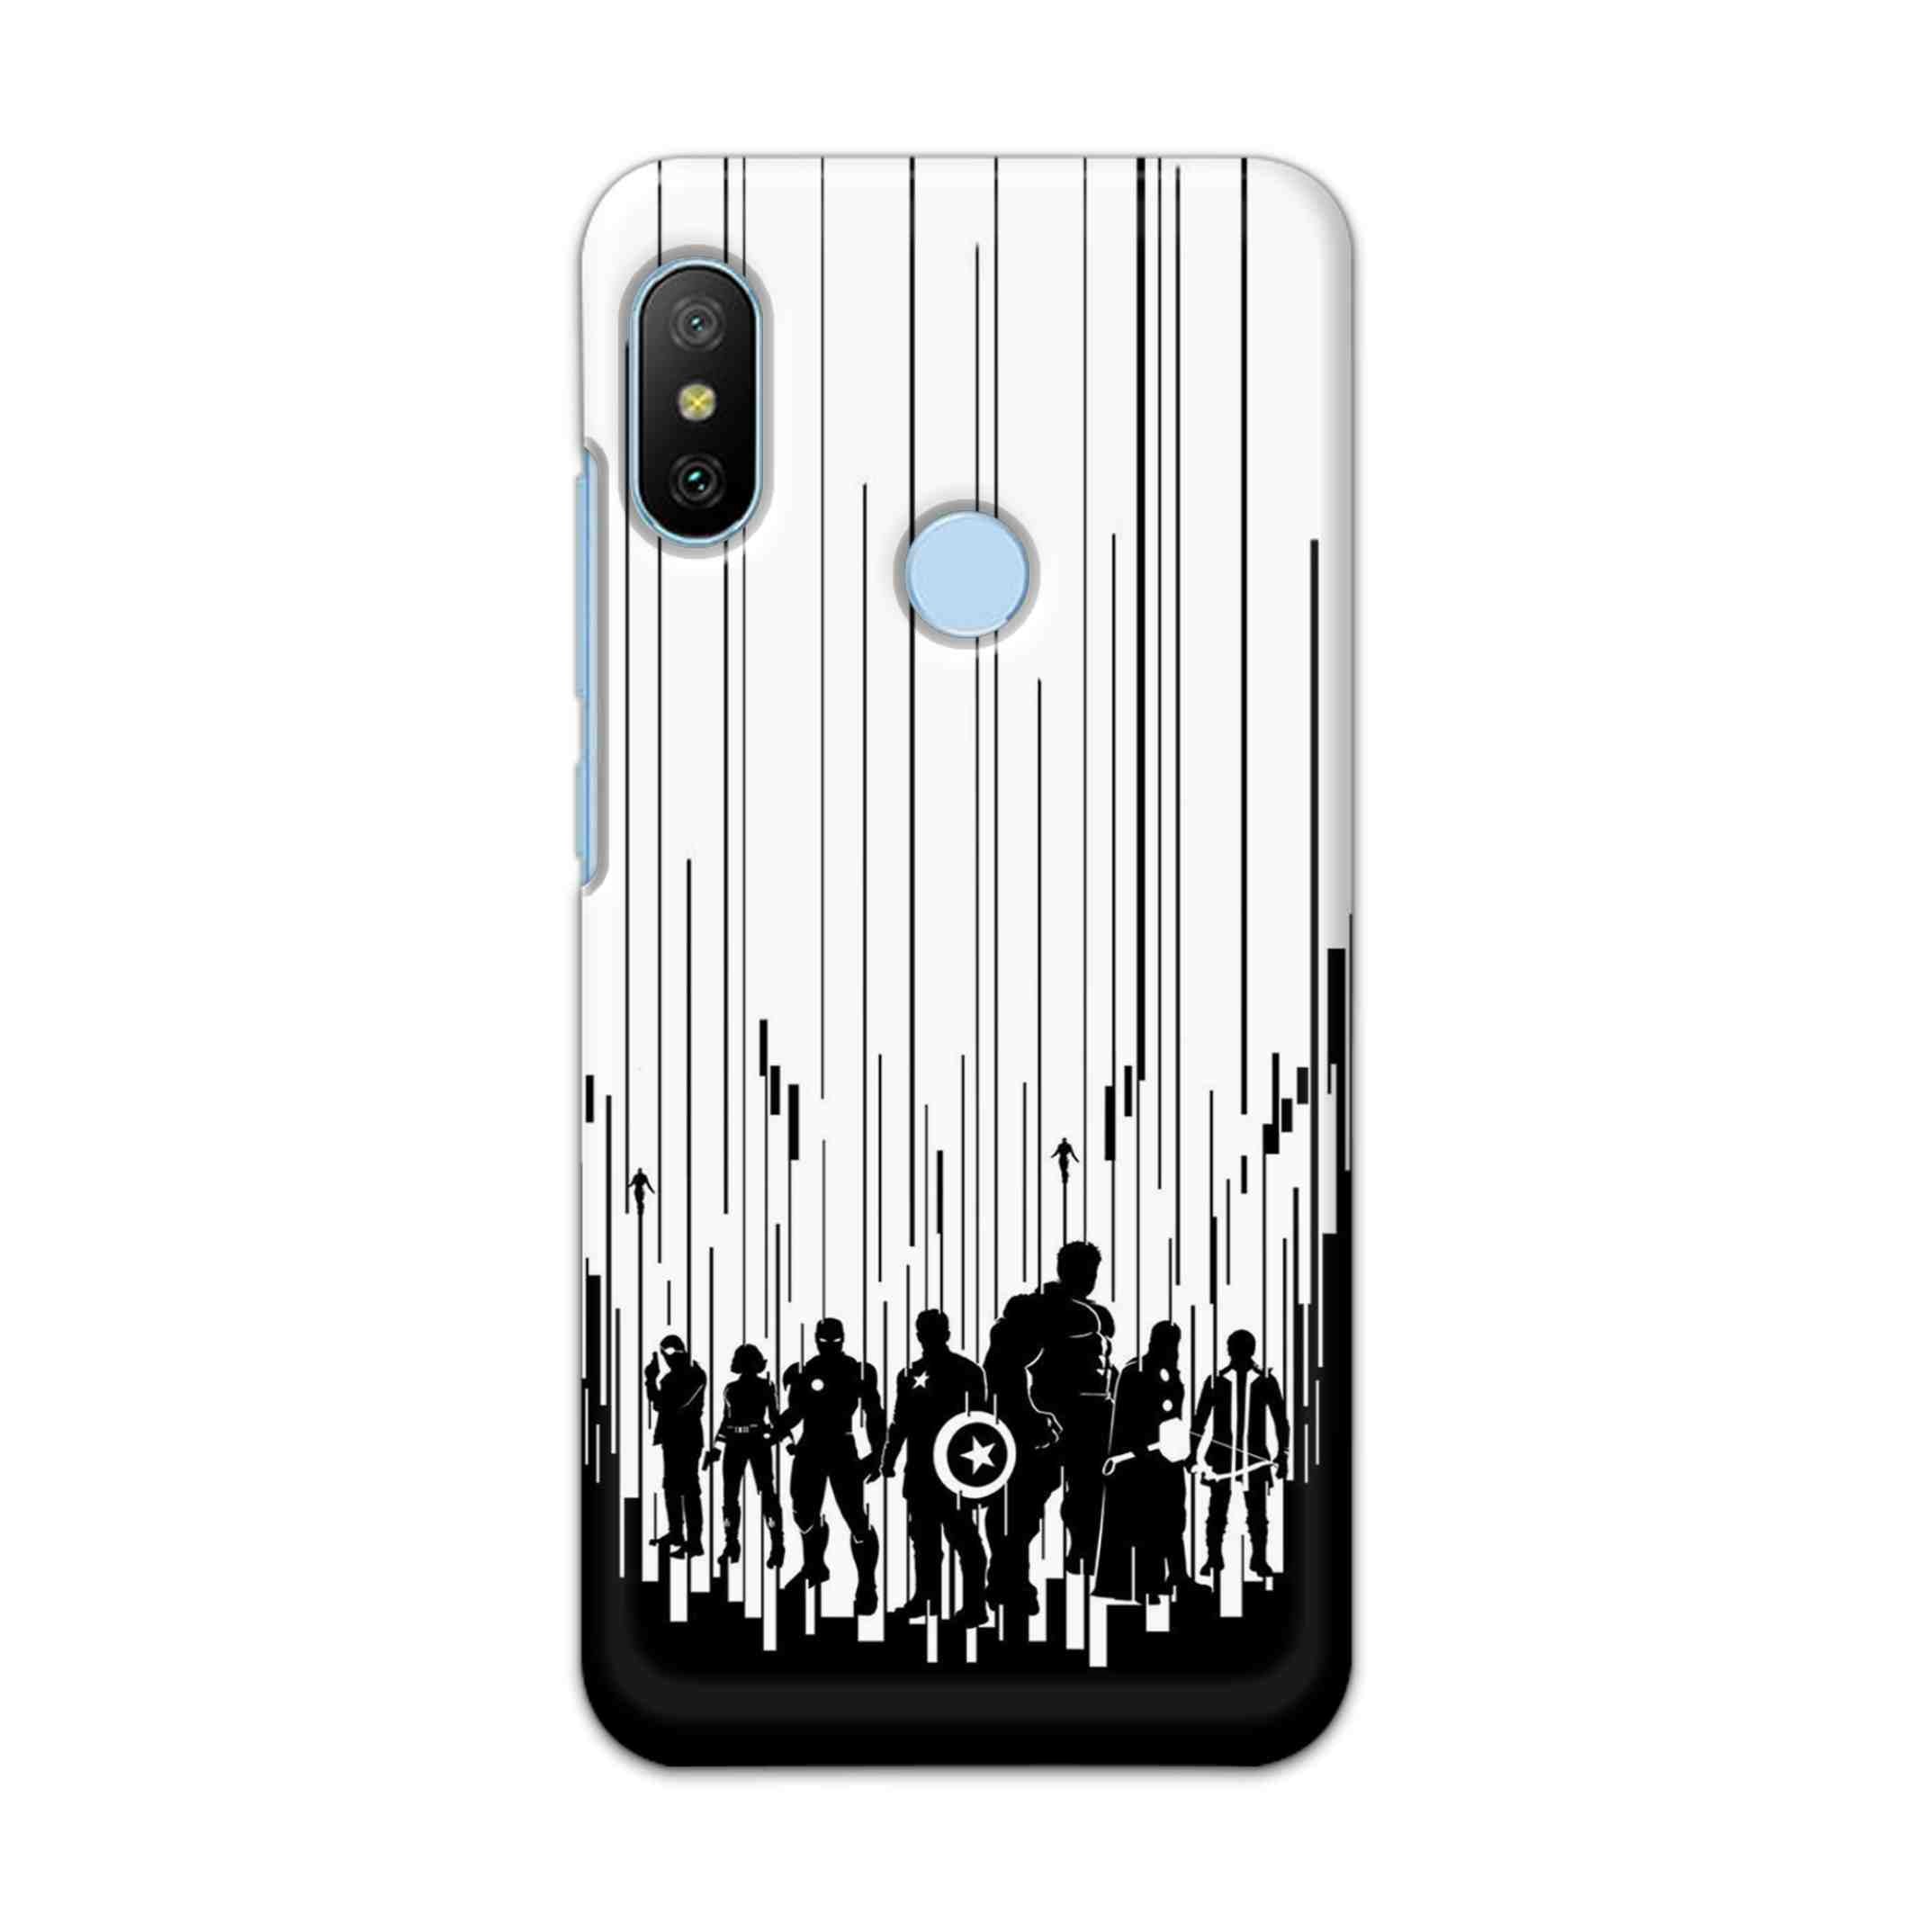 Buy Black And White Avanegers Hard Back Mobile Phone Case/Cover For Xiaomi Redmi 6 Pro Online